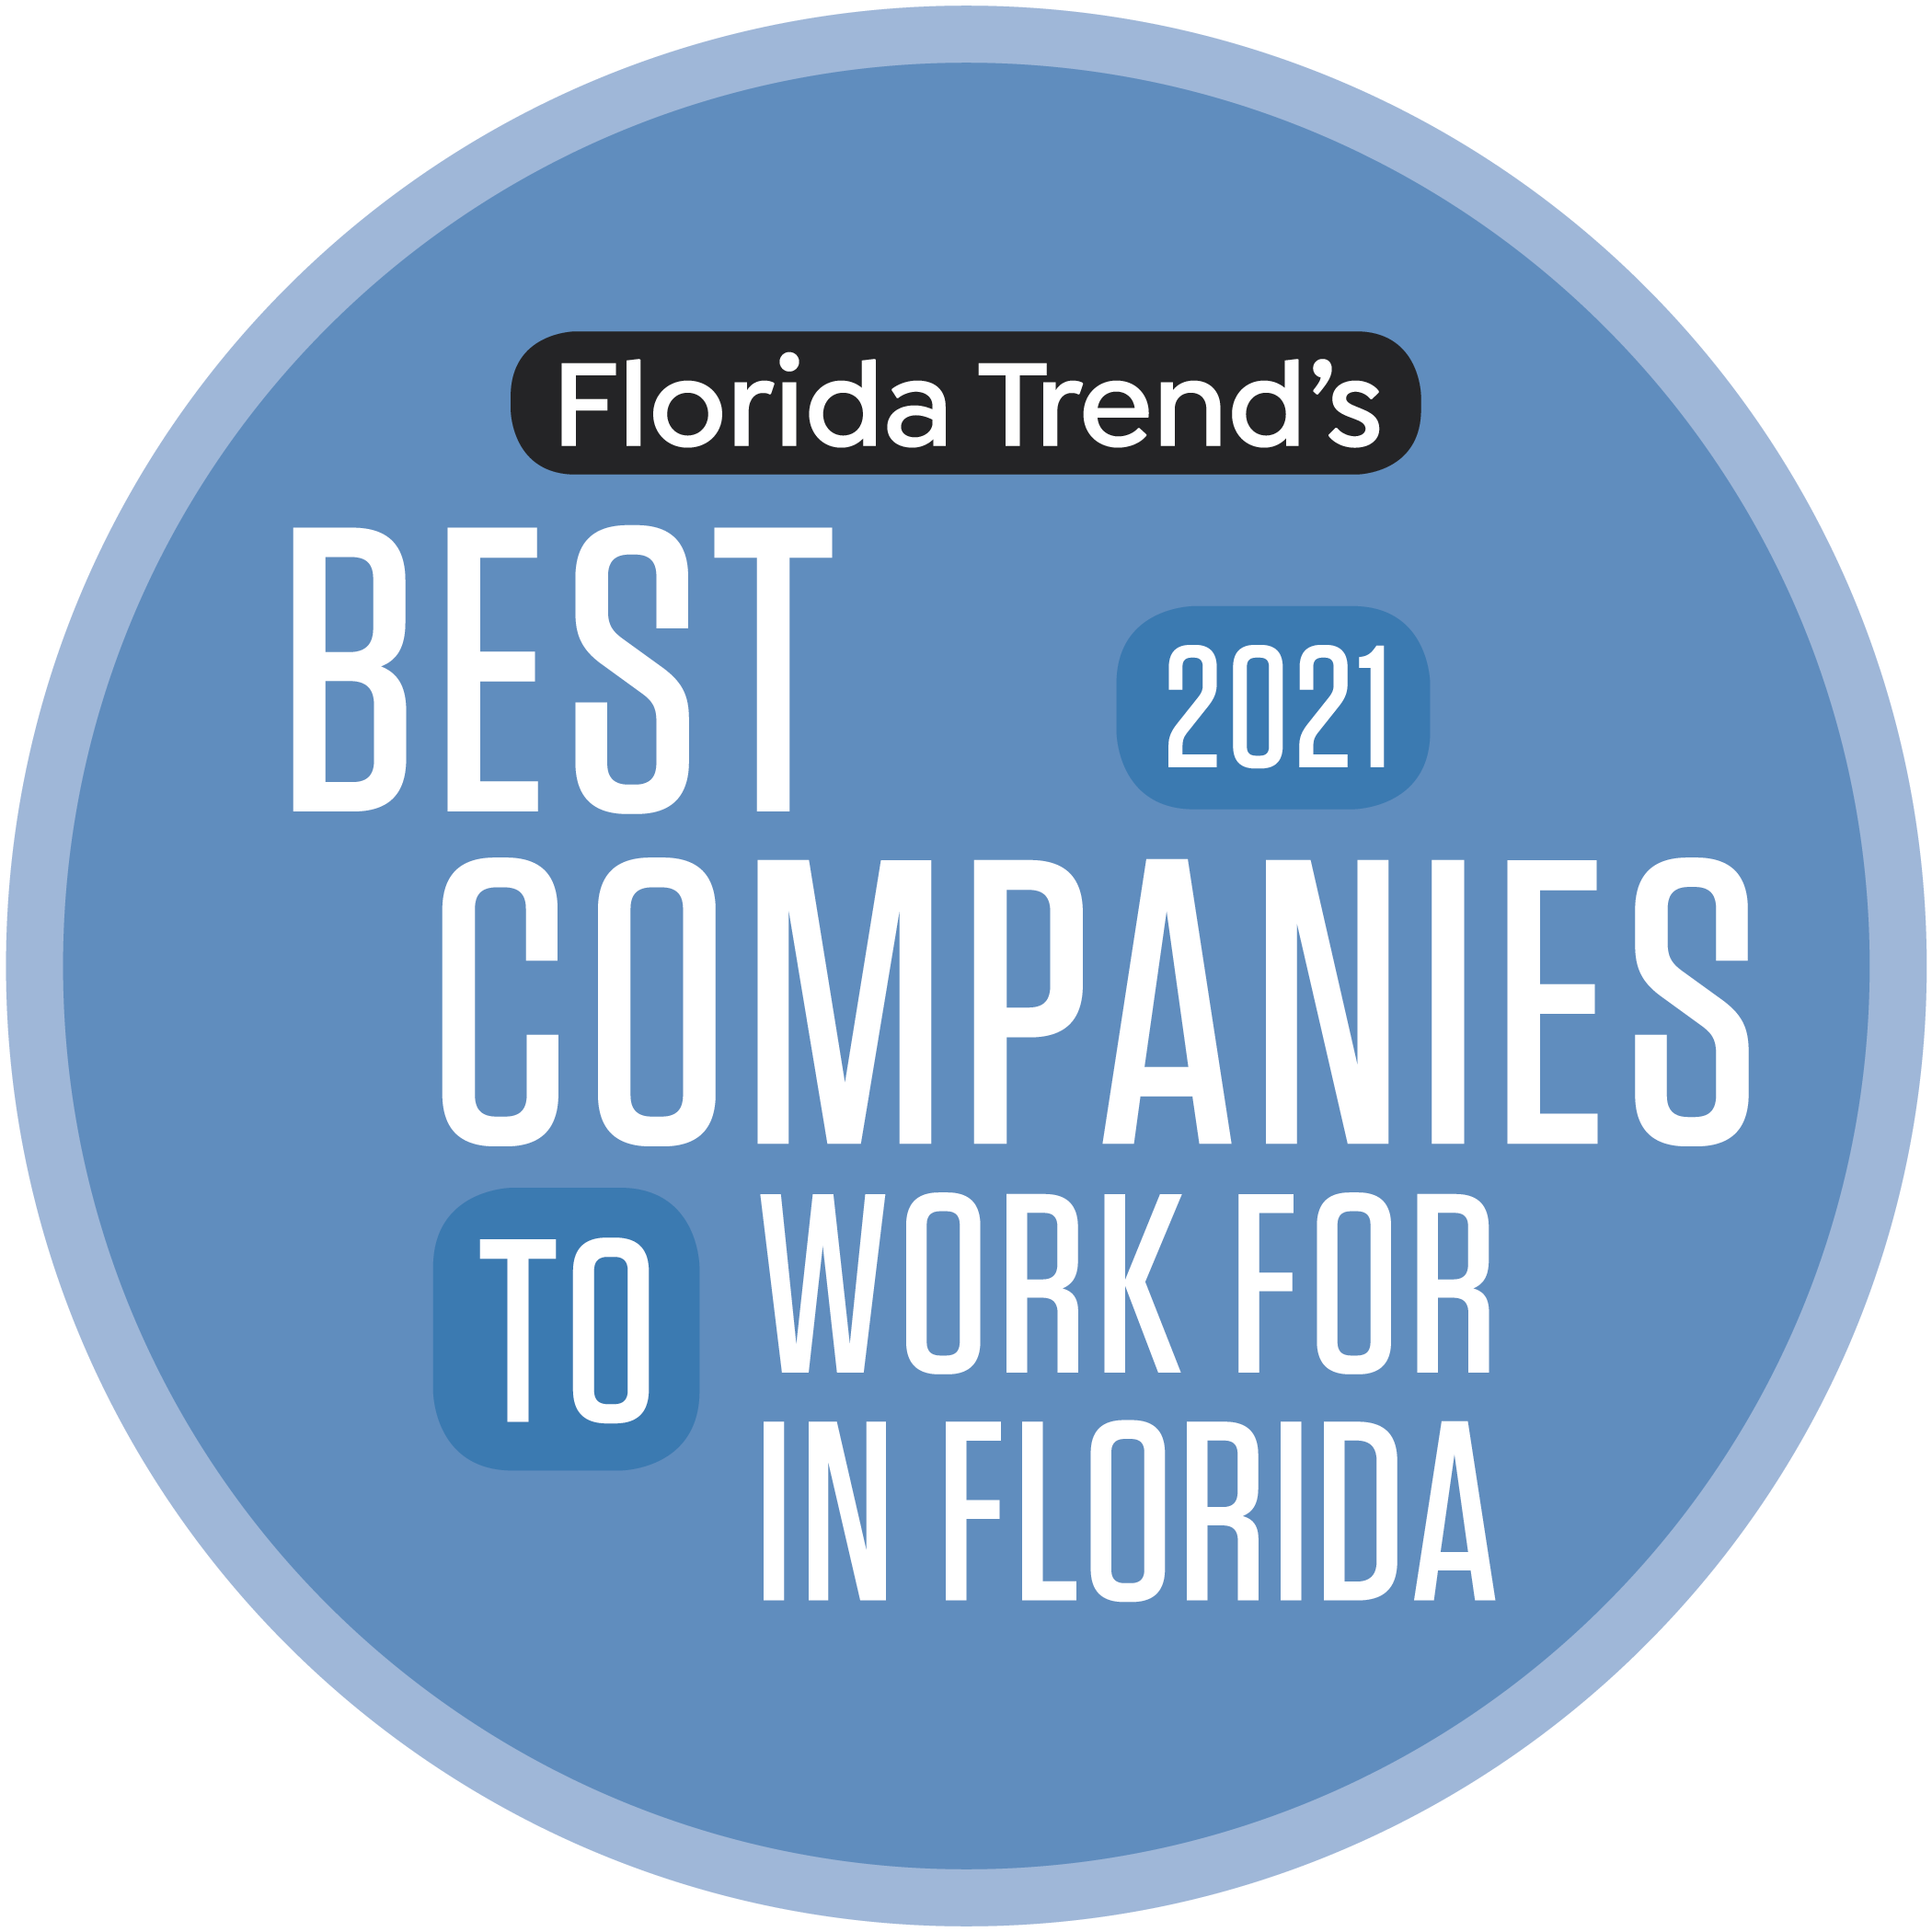 Best Companies to work for in Florida 2021